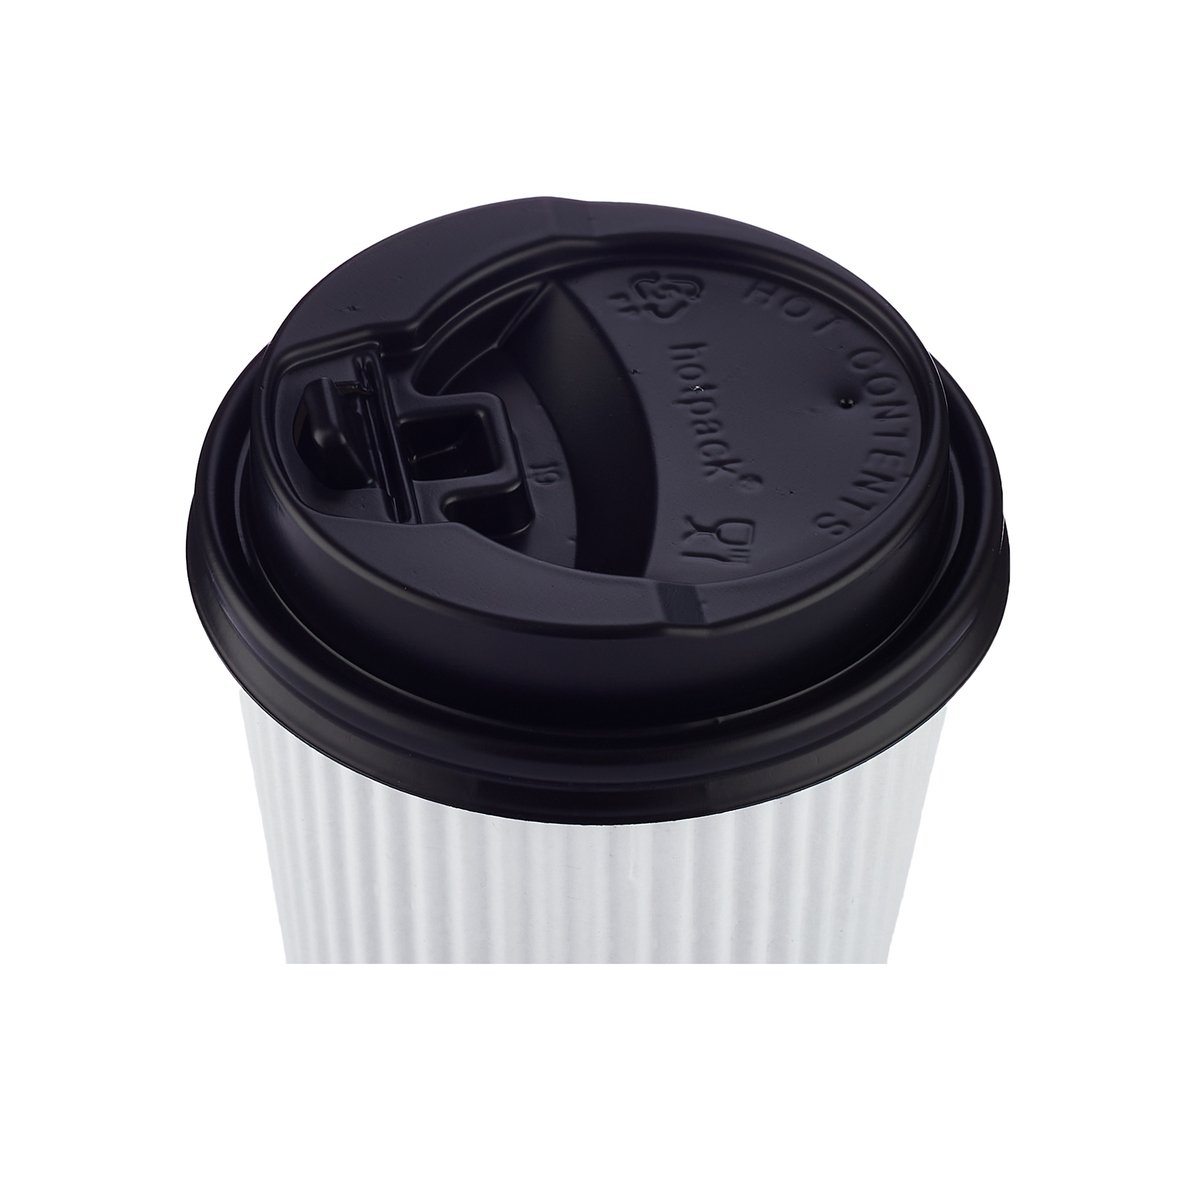 Hotpack White Ripple Paper Cup With Lids Capacity 8oz 10pcs